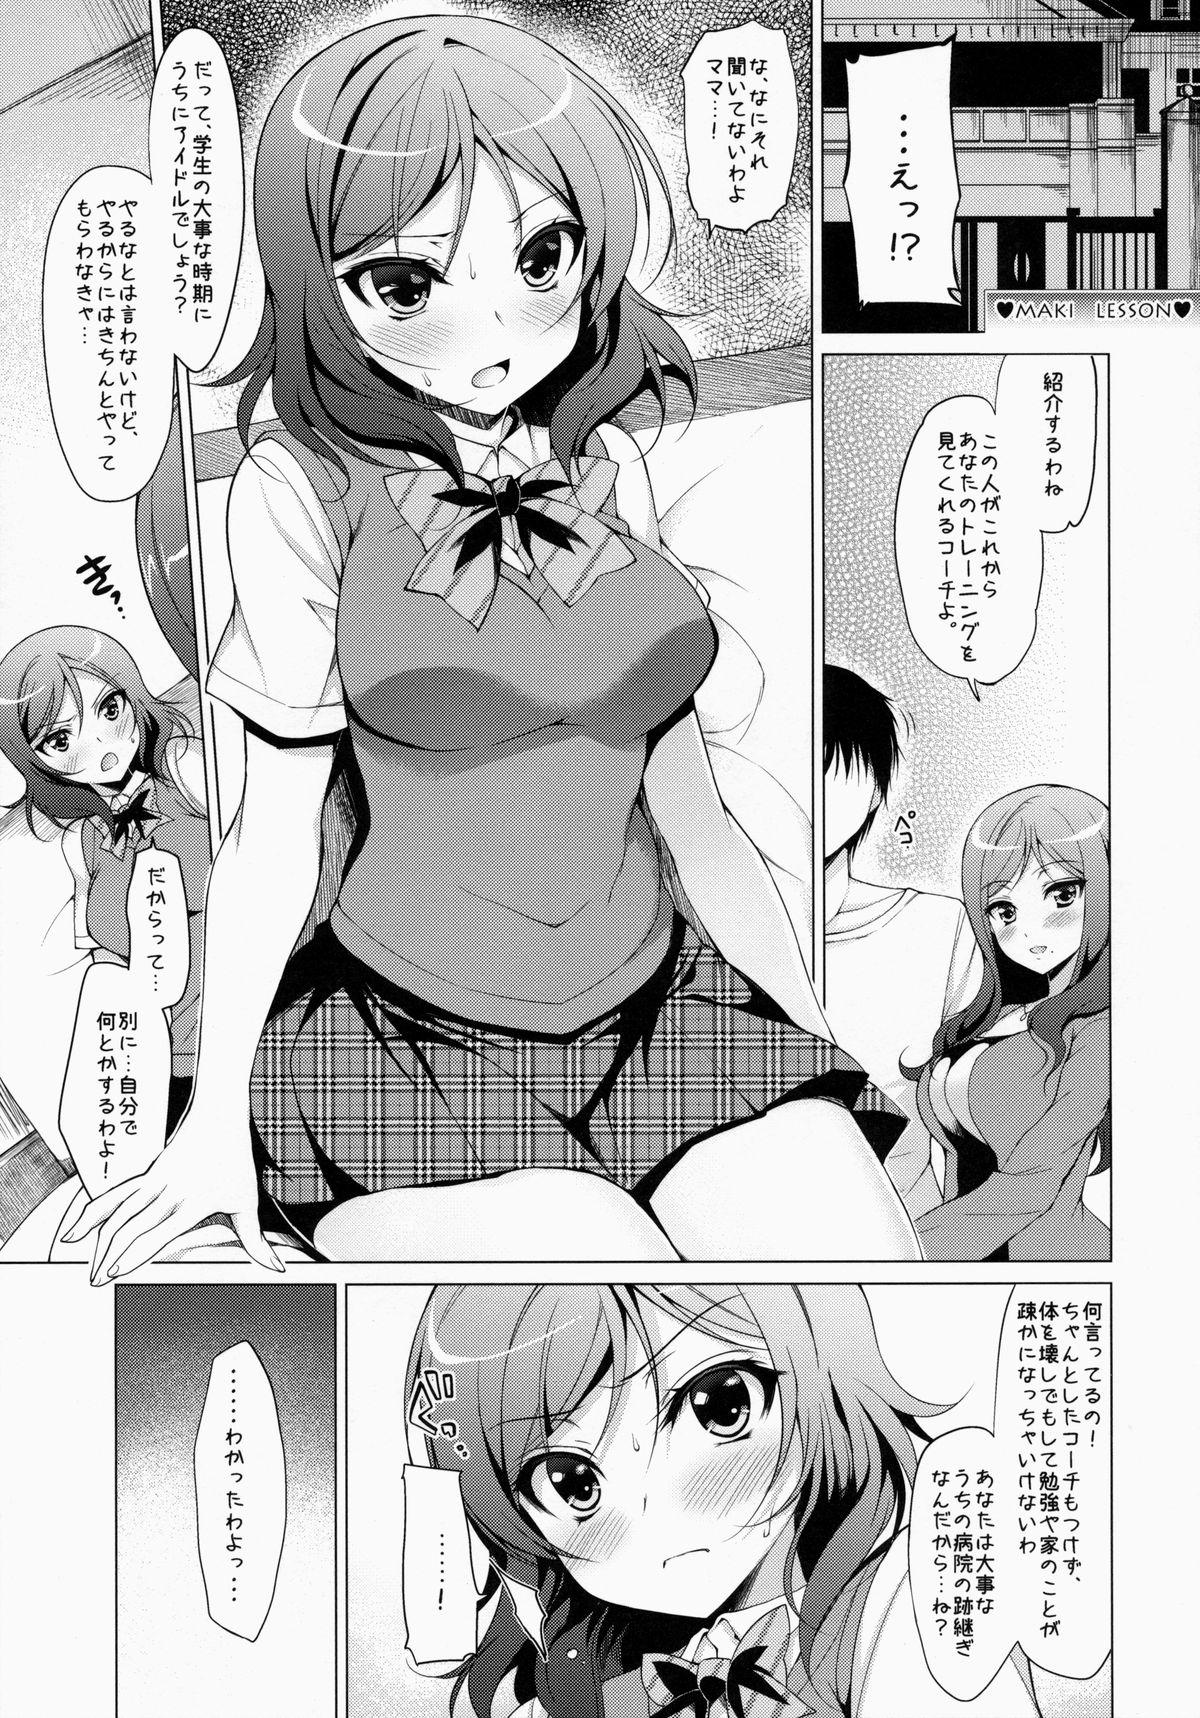 Colombiana MAKI LESSON - Love live Gay Bukkakeboys - Page 4